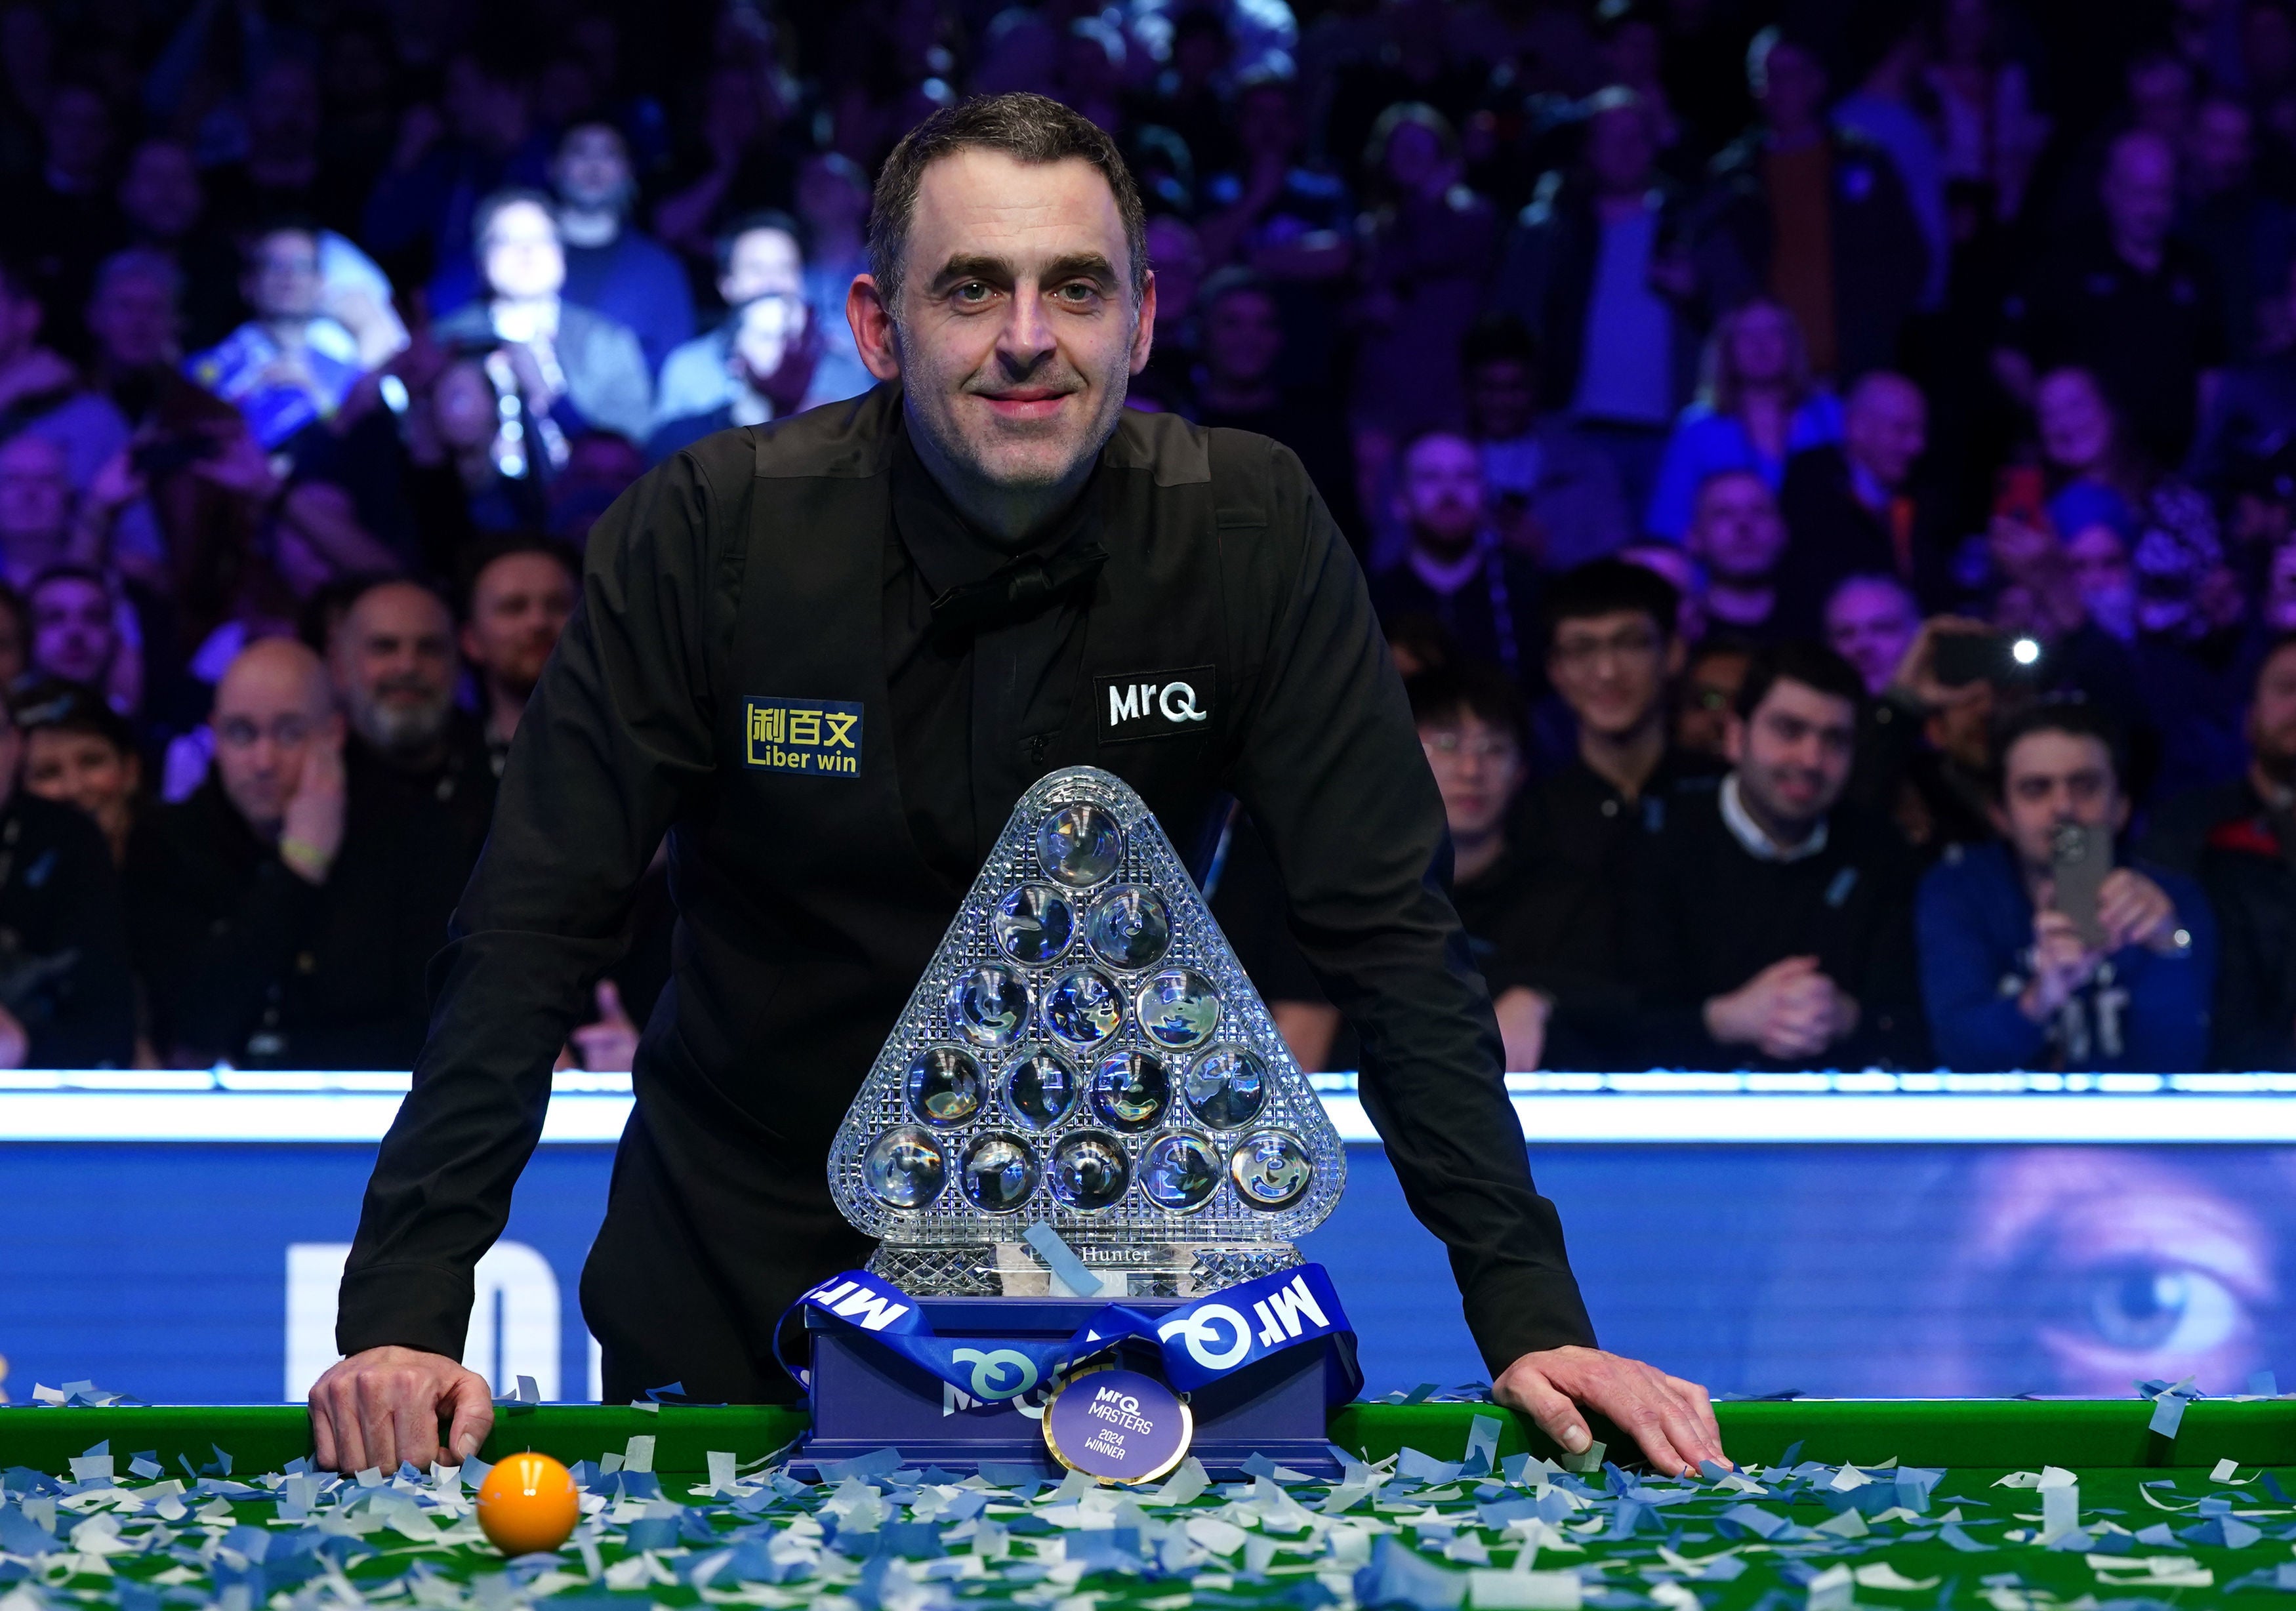 The Rocket claimed his eighth Masters crown with victory over Carter